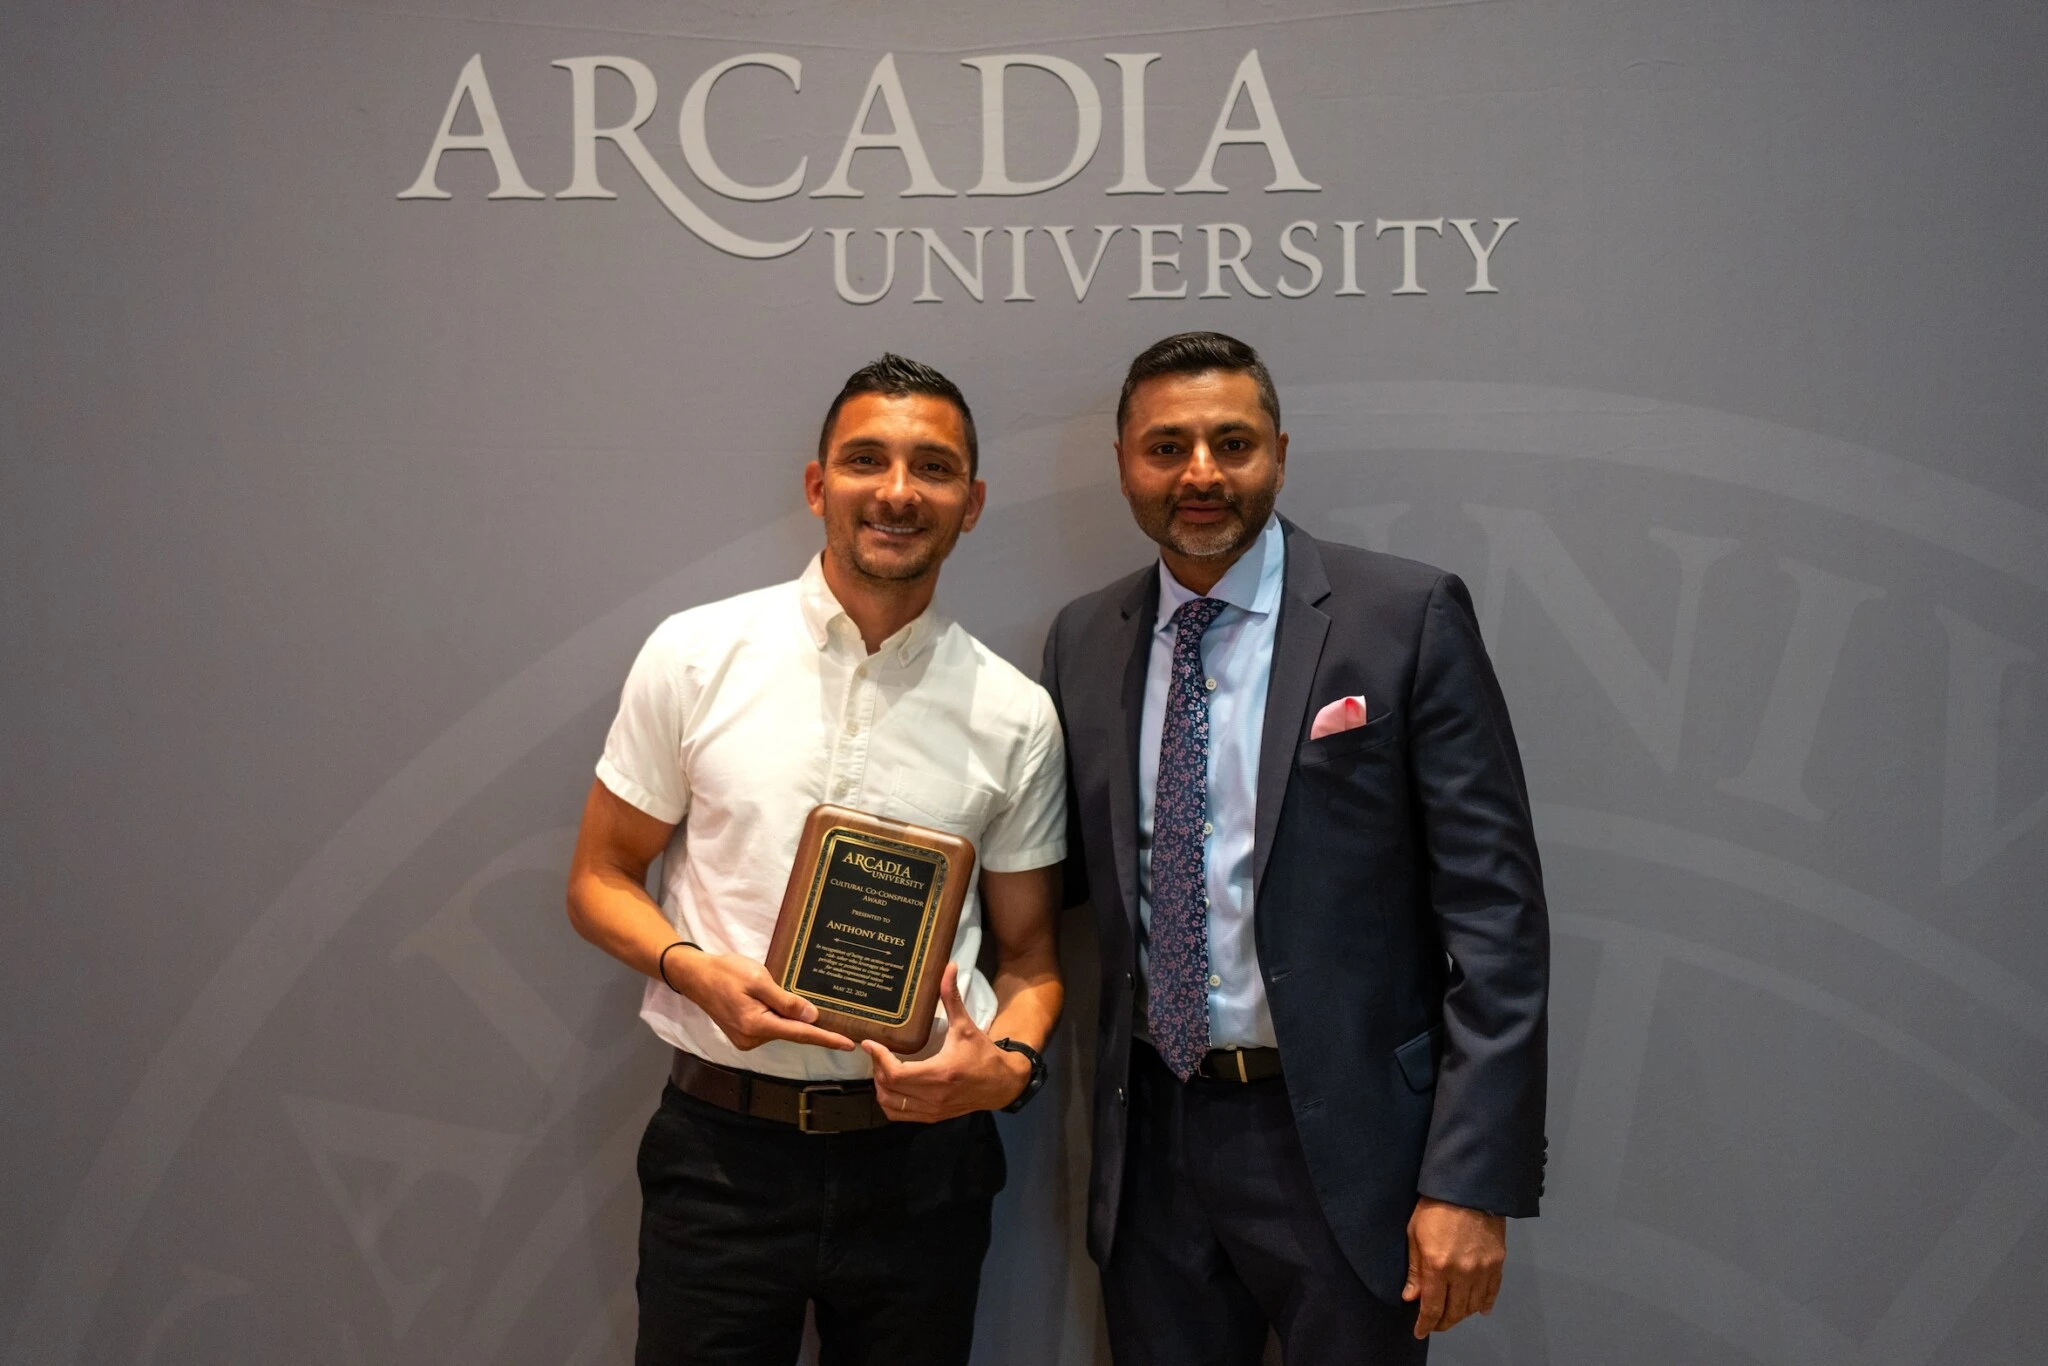 Anthony Reyes holds the Cultural Co-Conspirator Award and stands next to President Ajay Nair